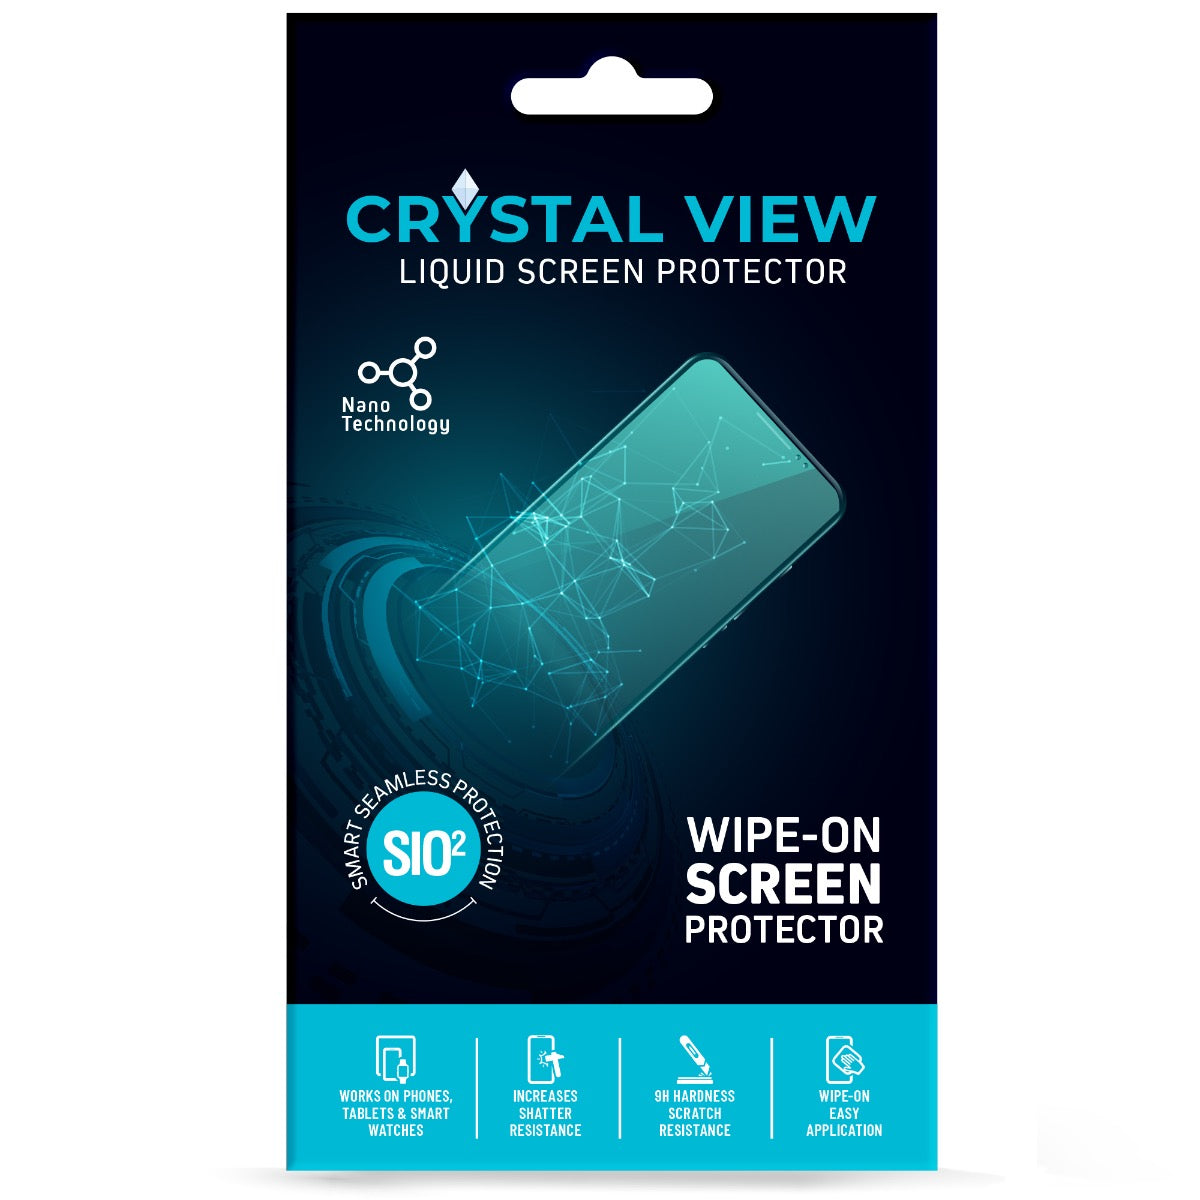 CRYSTAL VIEW Liquid Screen Protector for All Phones Tablets and Smart Watches